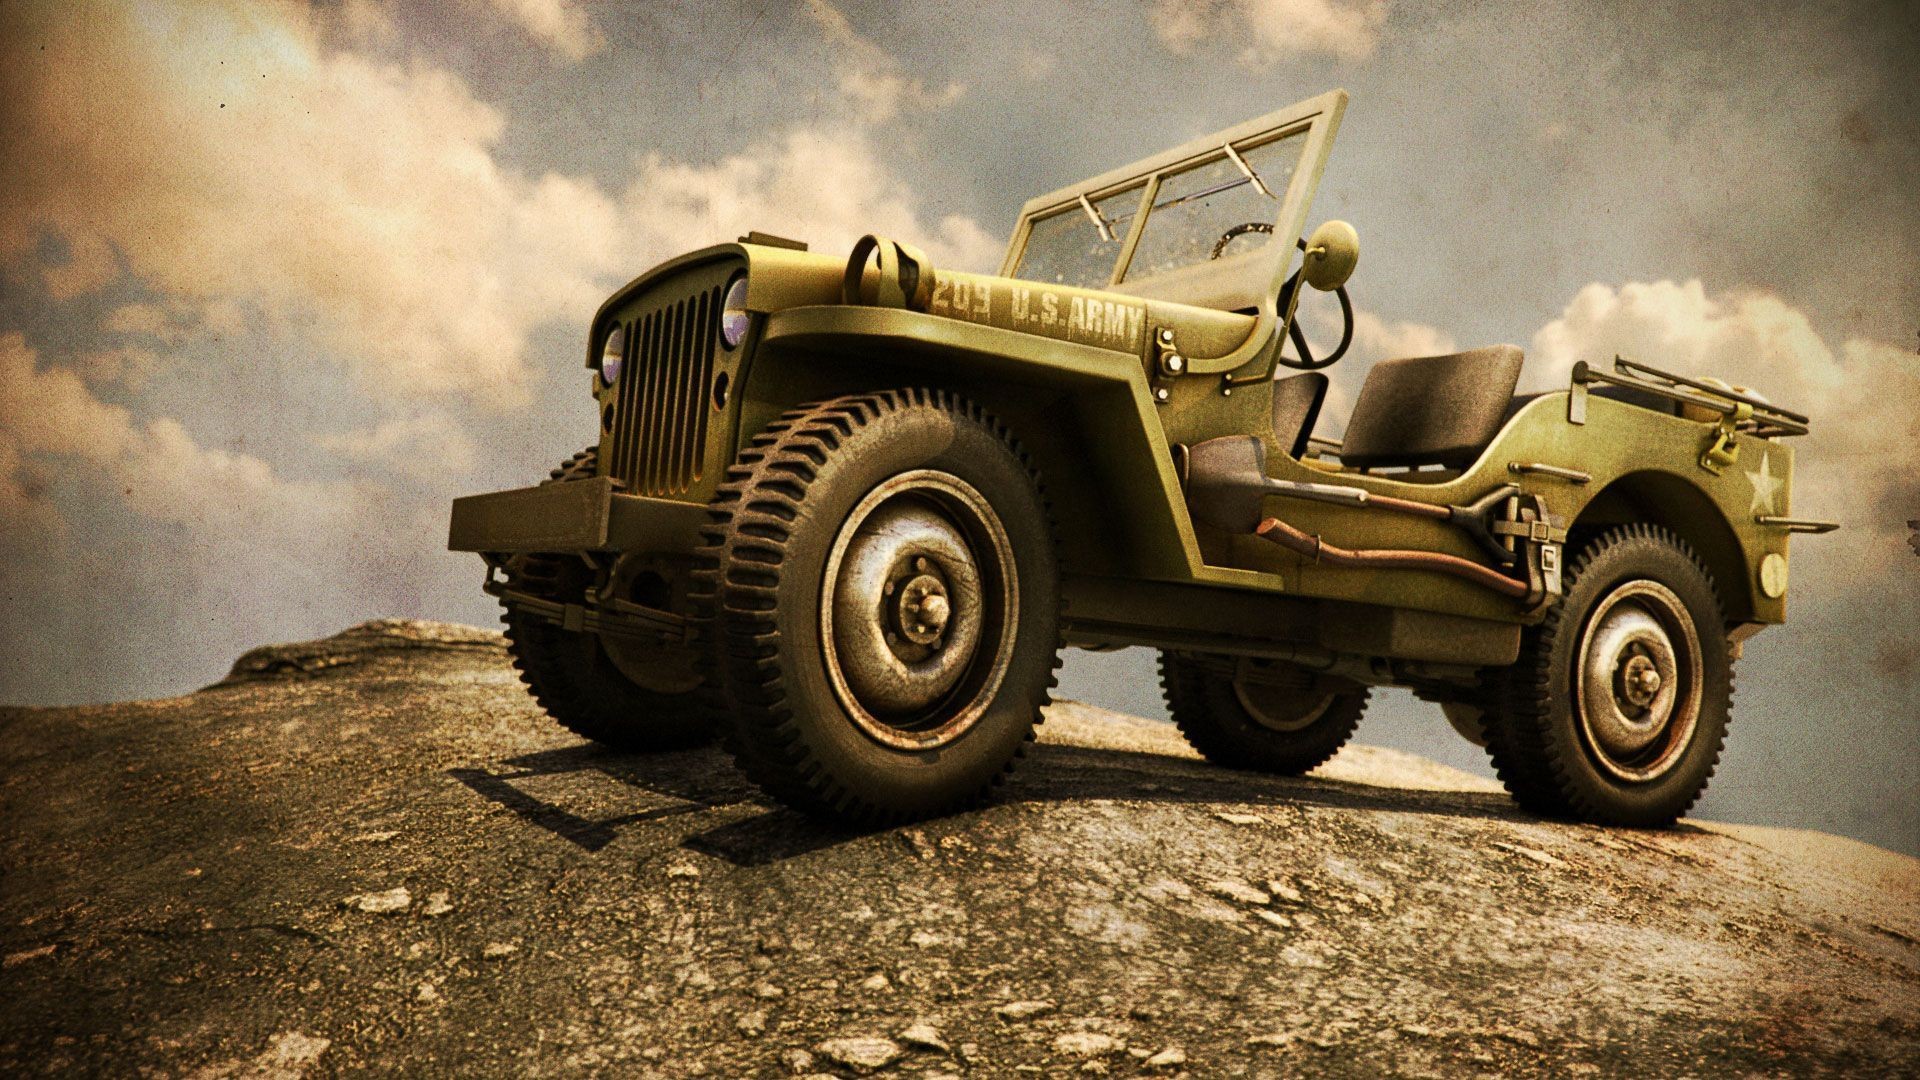 Jeep Wallpaper background picture